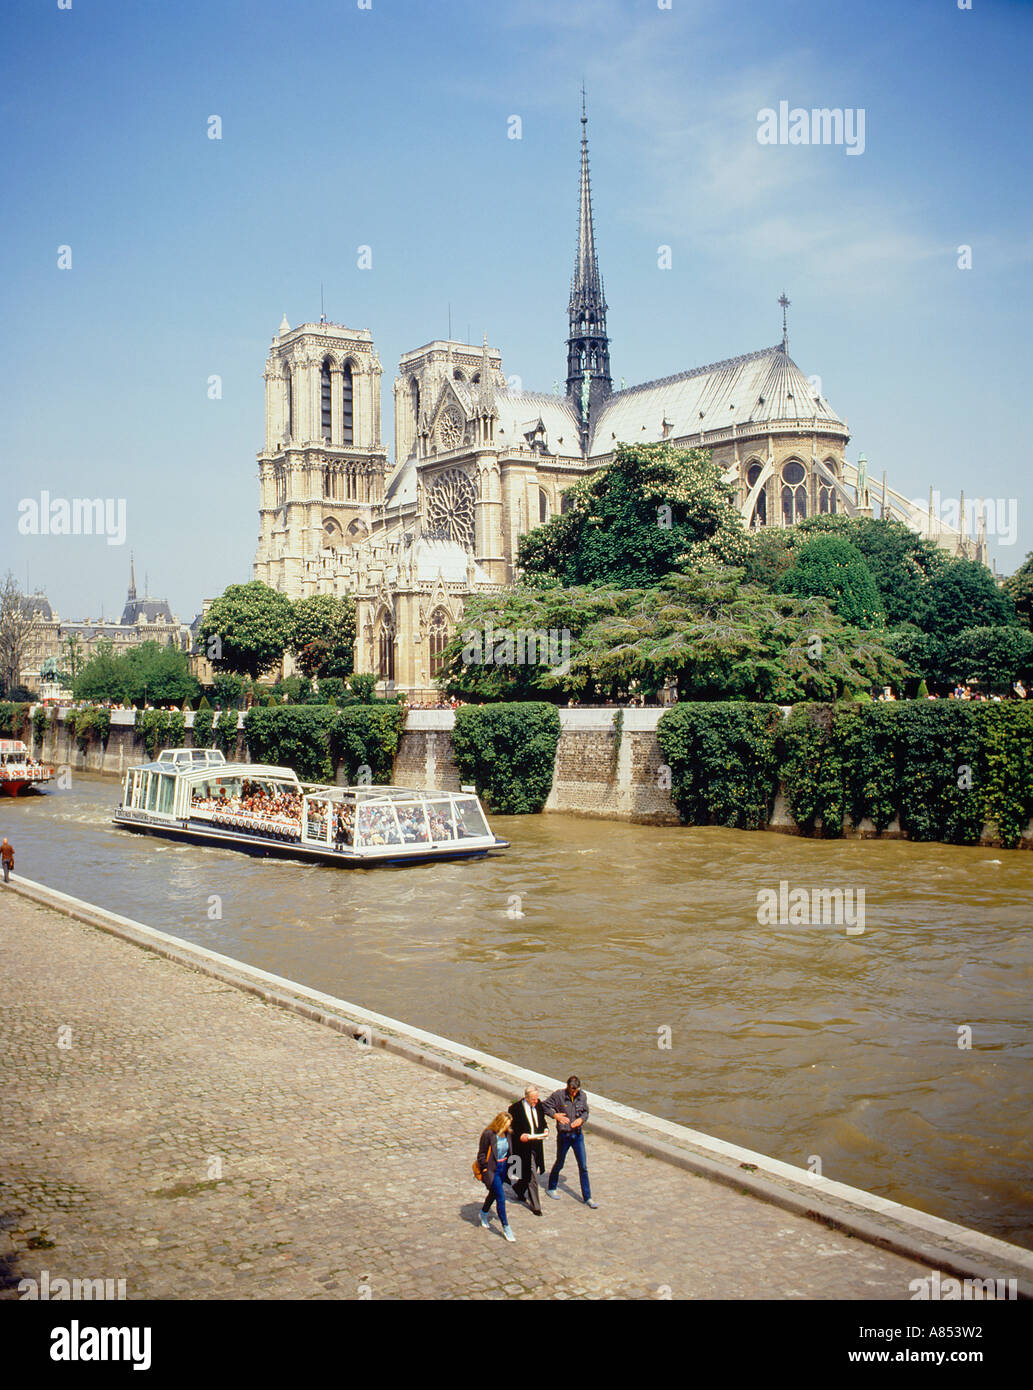 France. Paris. Notre Dame cathedral. People walking by the River Seine with tourist boat. Stock Photo